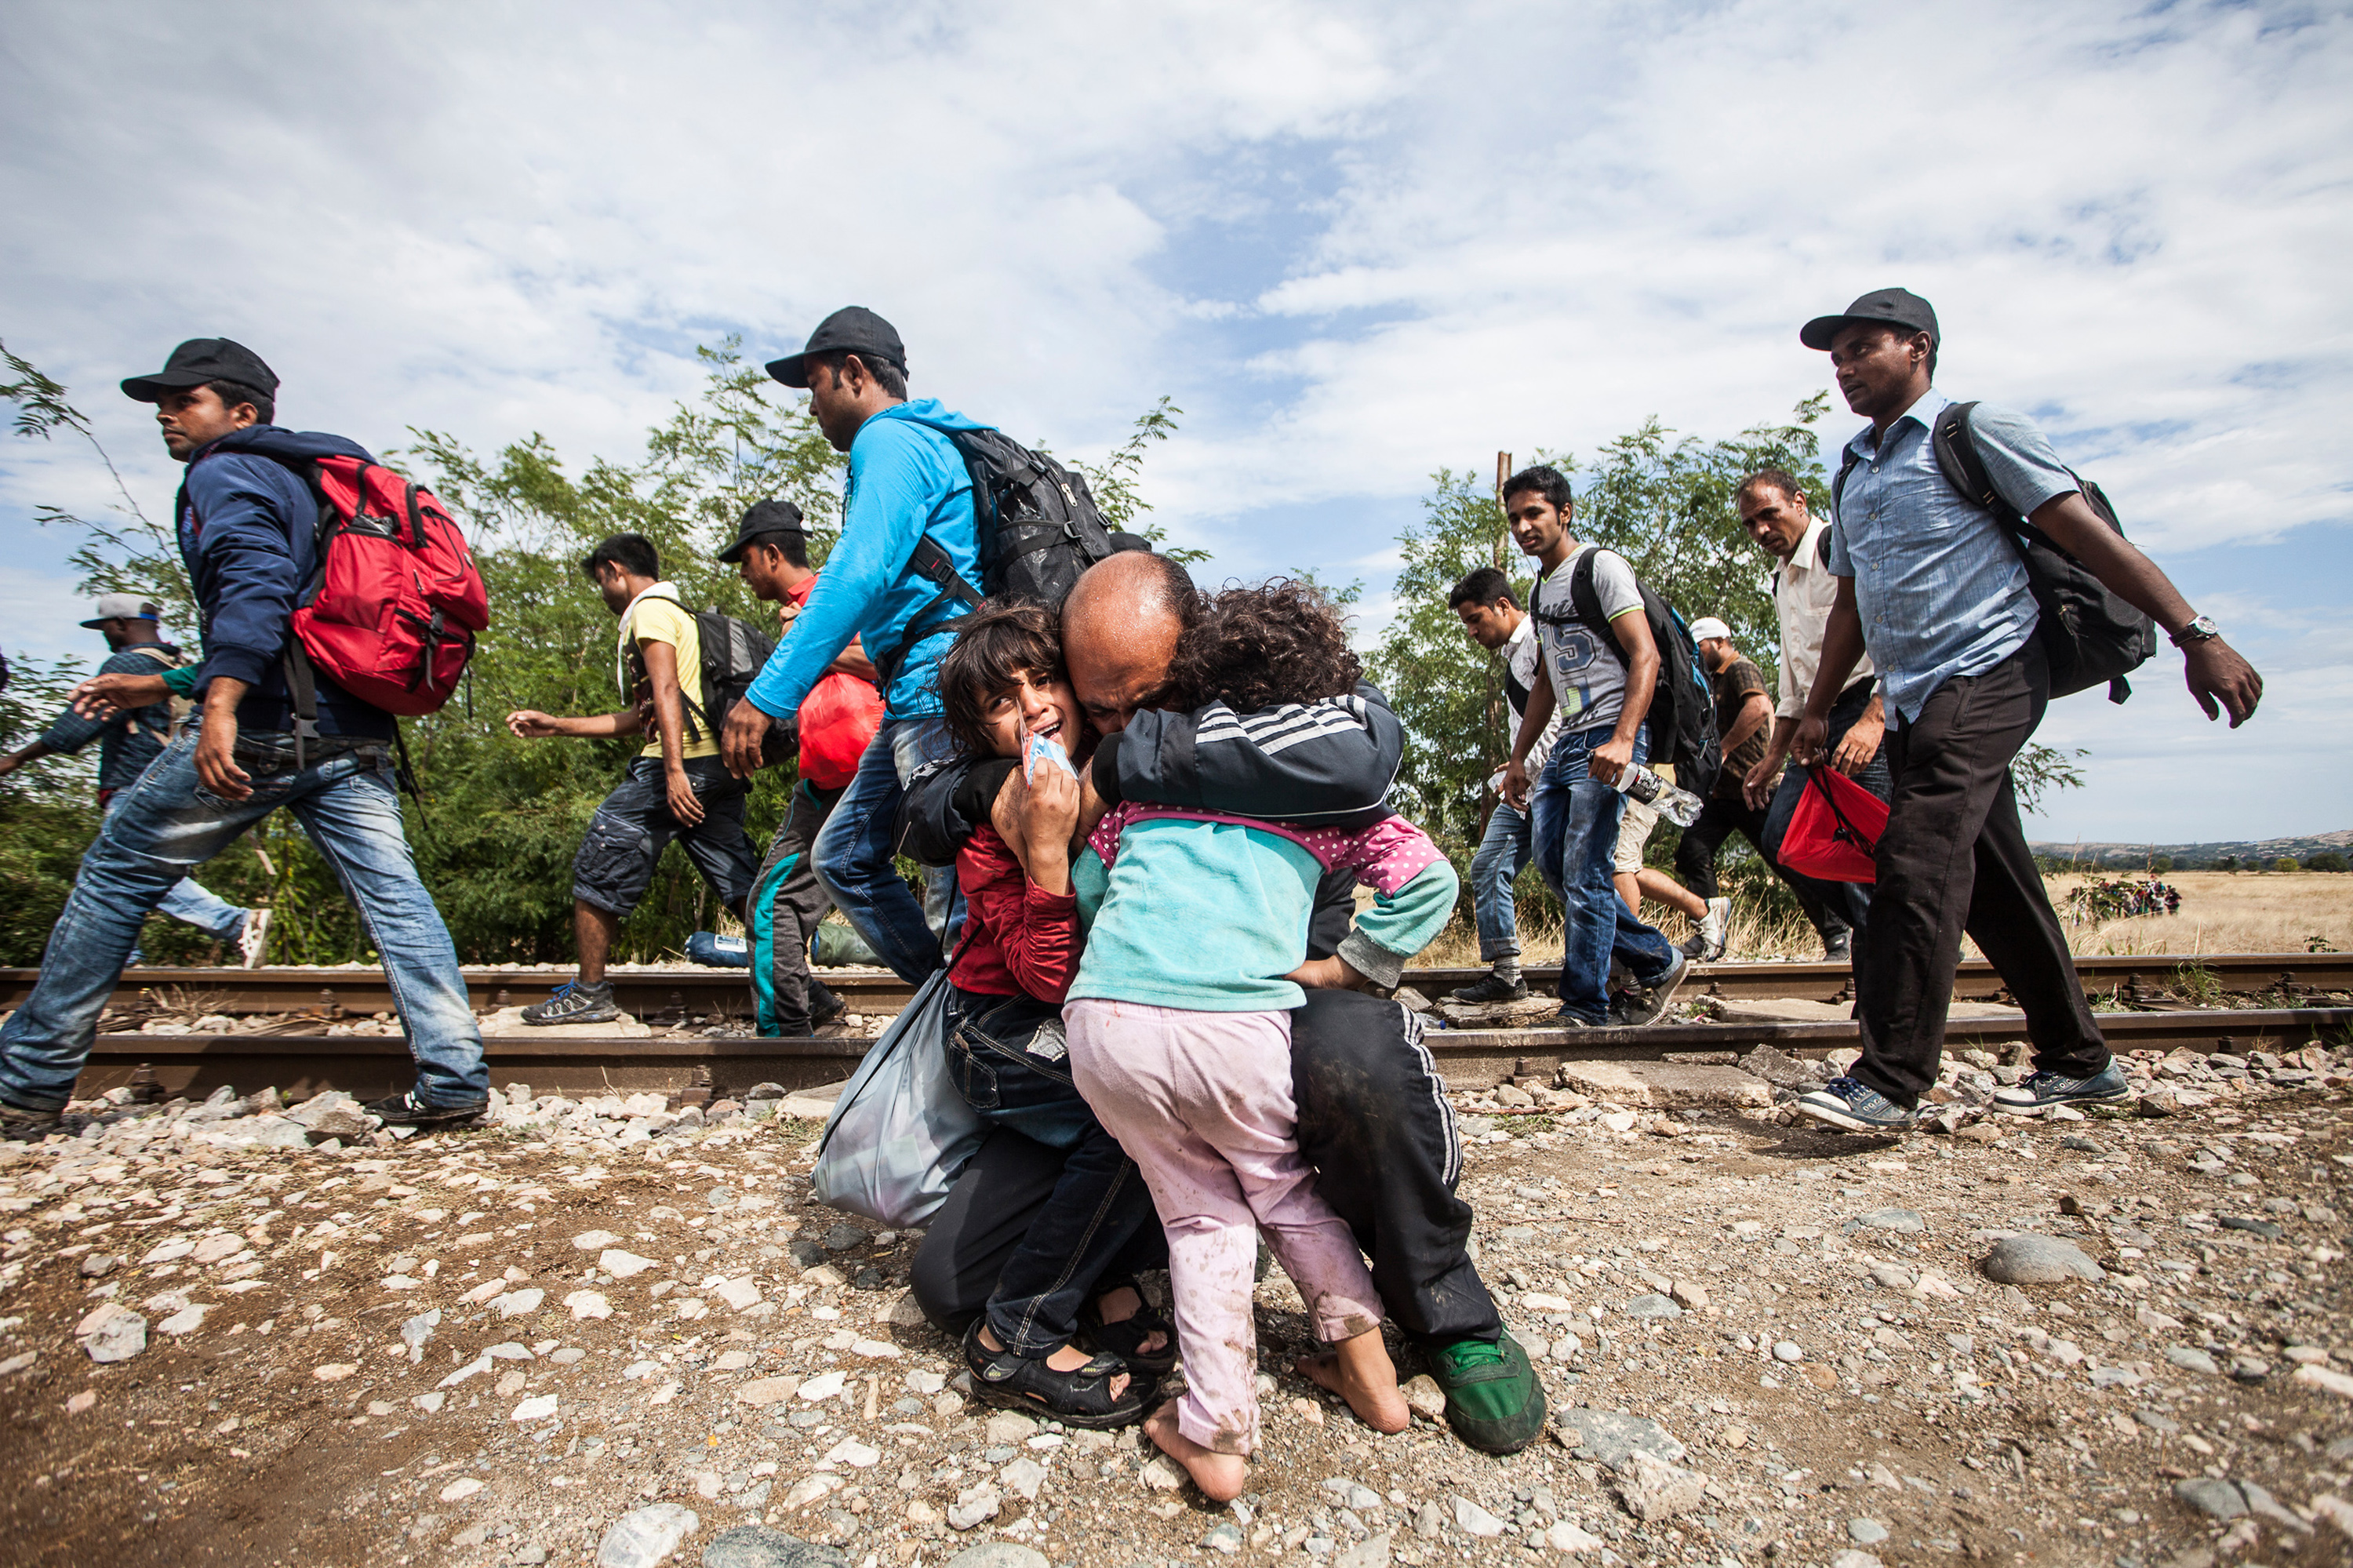 Father hugs his lost children after the clashes erupted at the border between Greece and Macedonia. Tens of thousands of migrants were stranded on no manâs land between border lines for days, exposed to high temperatures during the day, rain and cold over night, which caused tension and several attempts to breach the Macedonian police lines. Photo by Igor Pavicevic / Kamerades